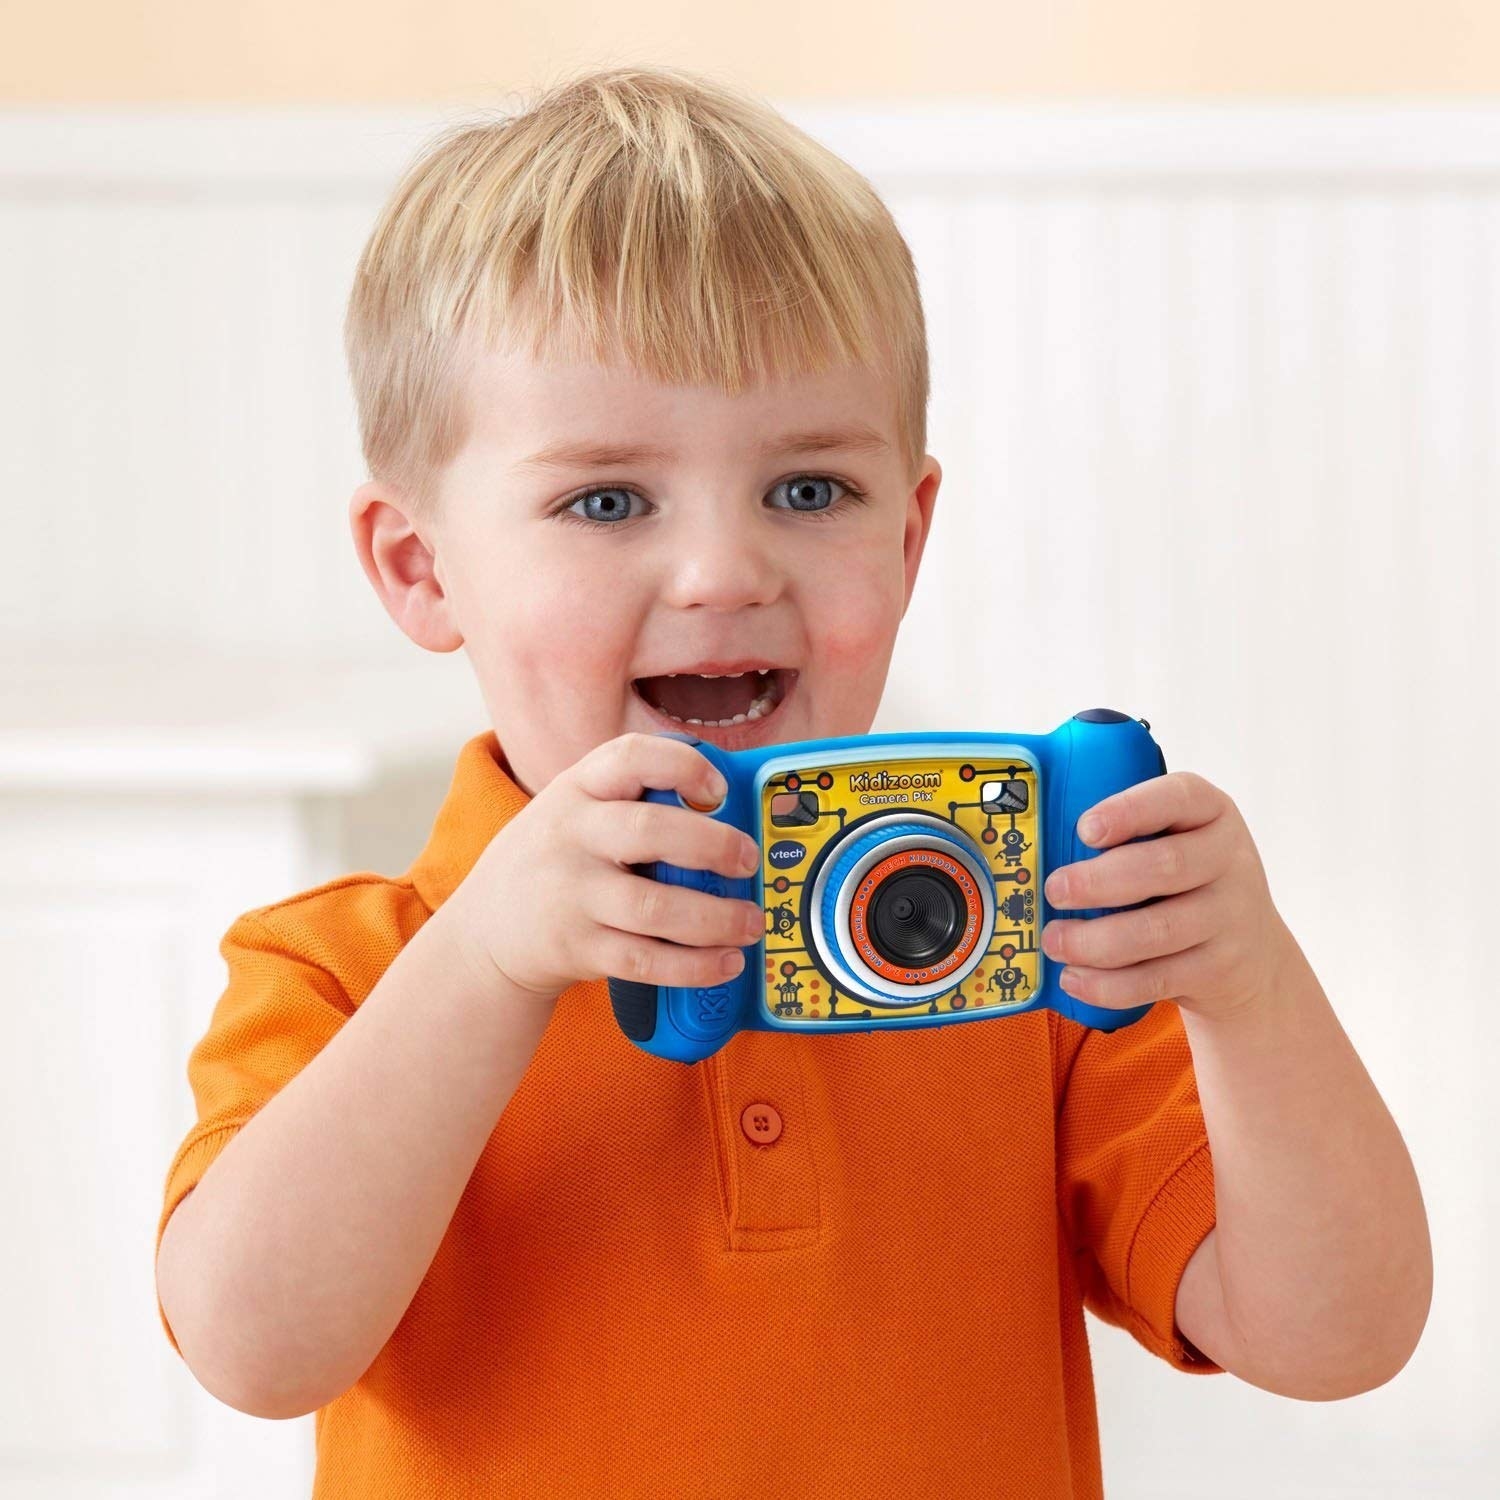 A child holding up a small camera